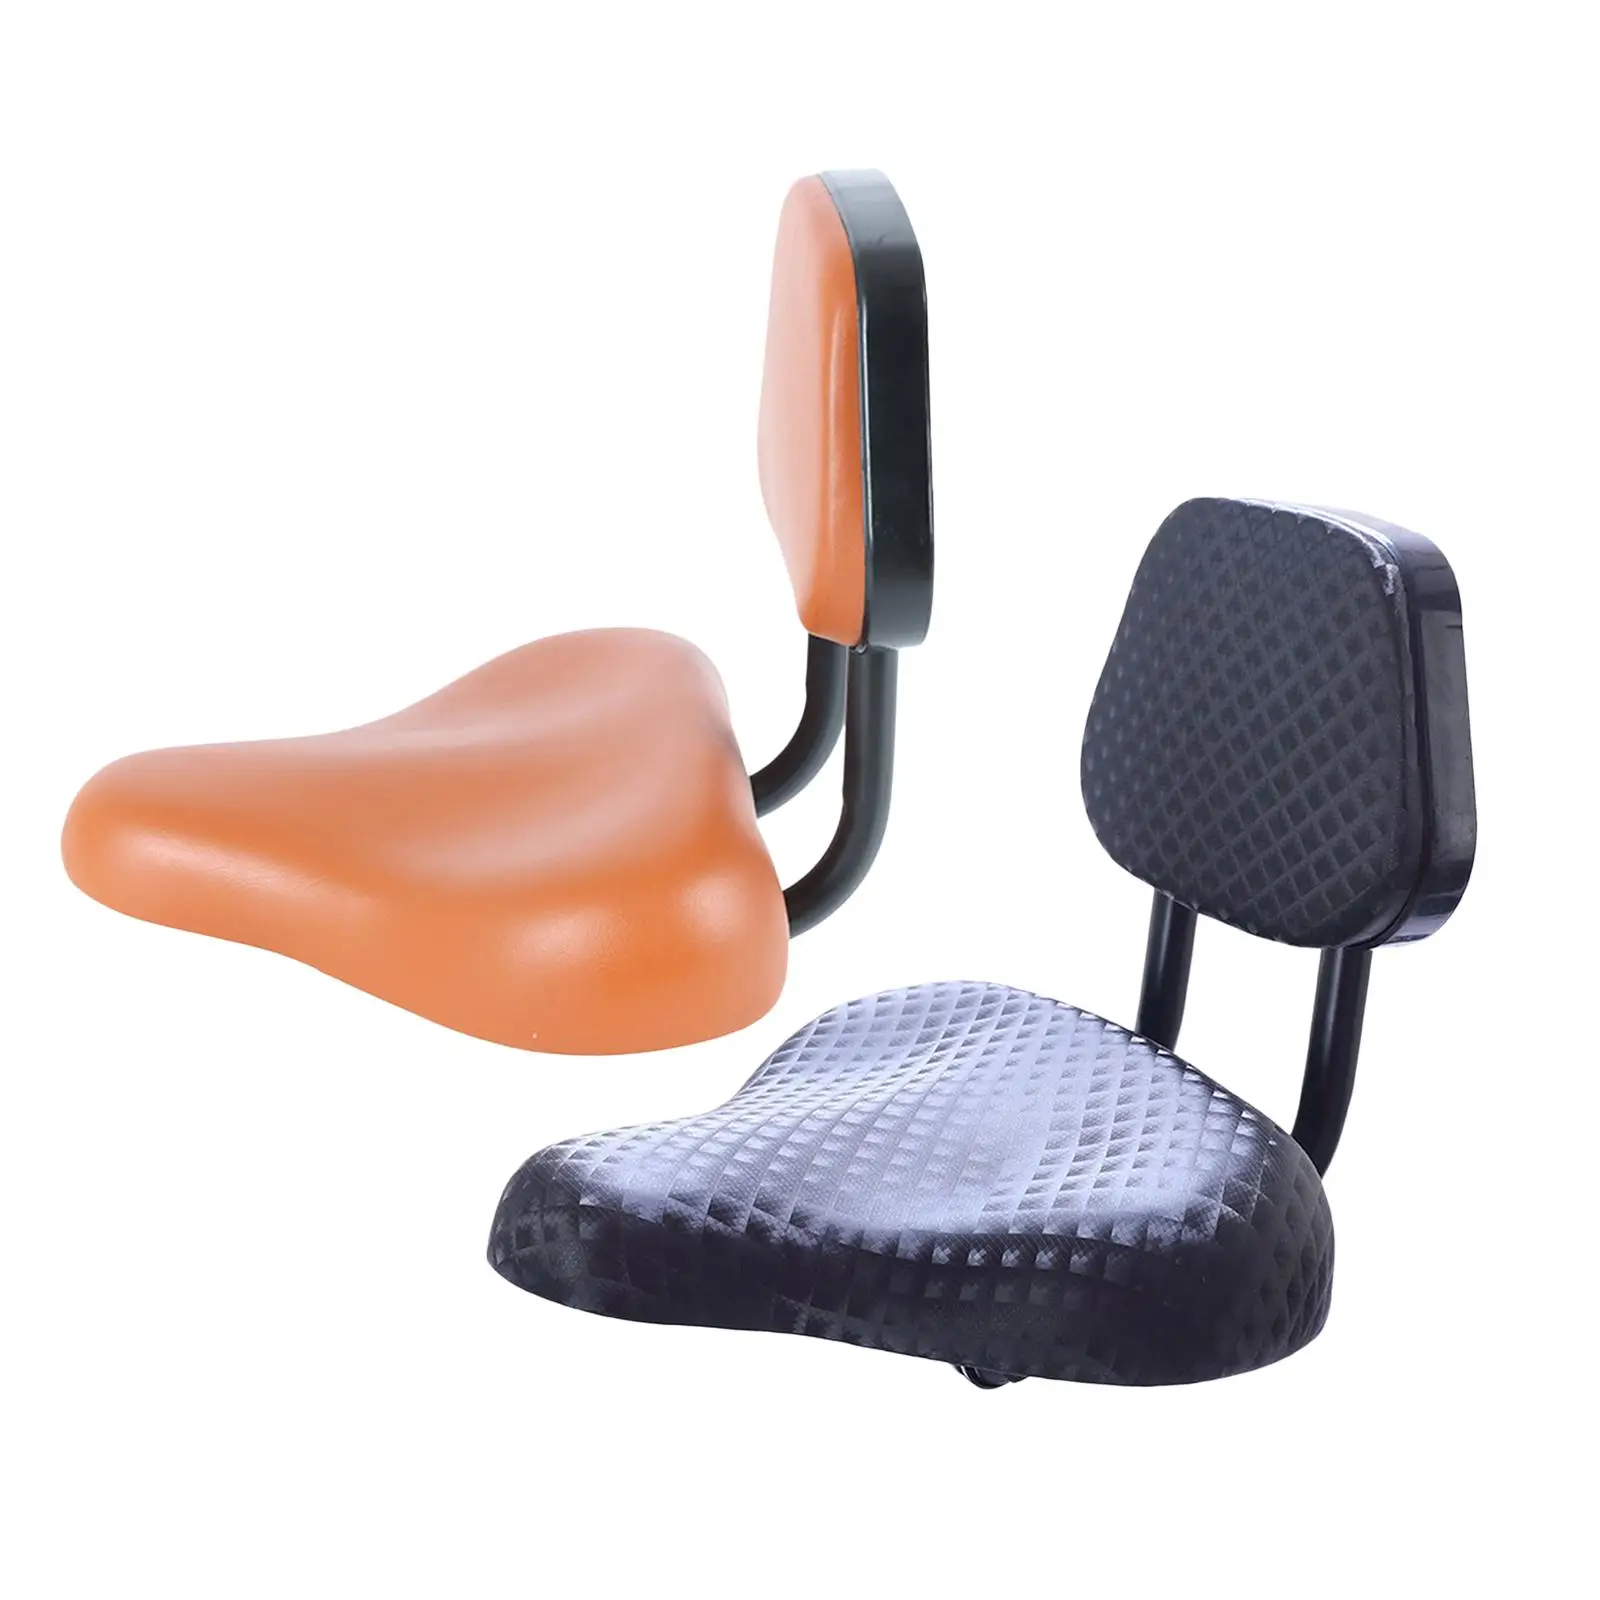 Bicycle saddle Bicycle seat with backrest, bicycle tricycle saddle seat with